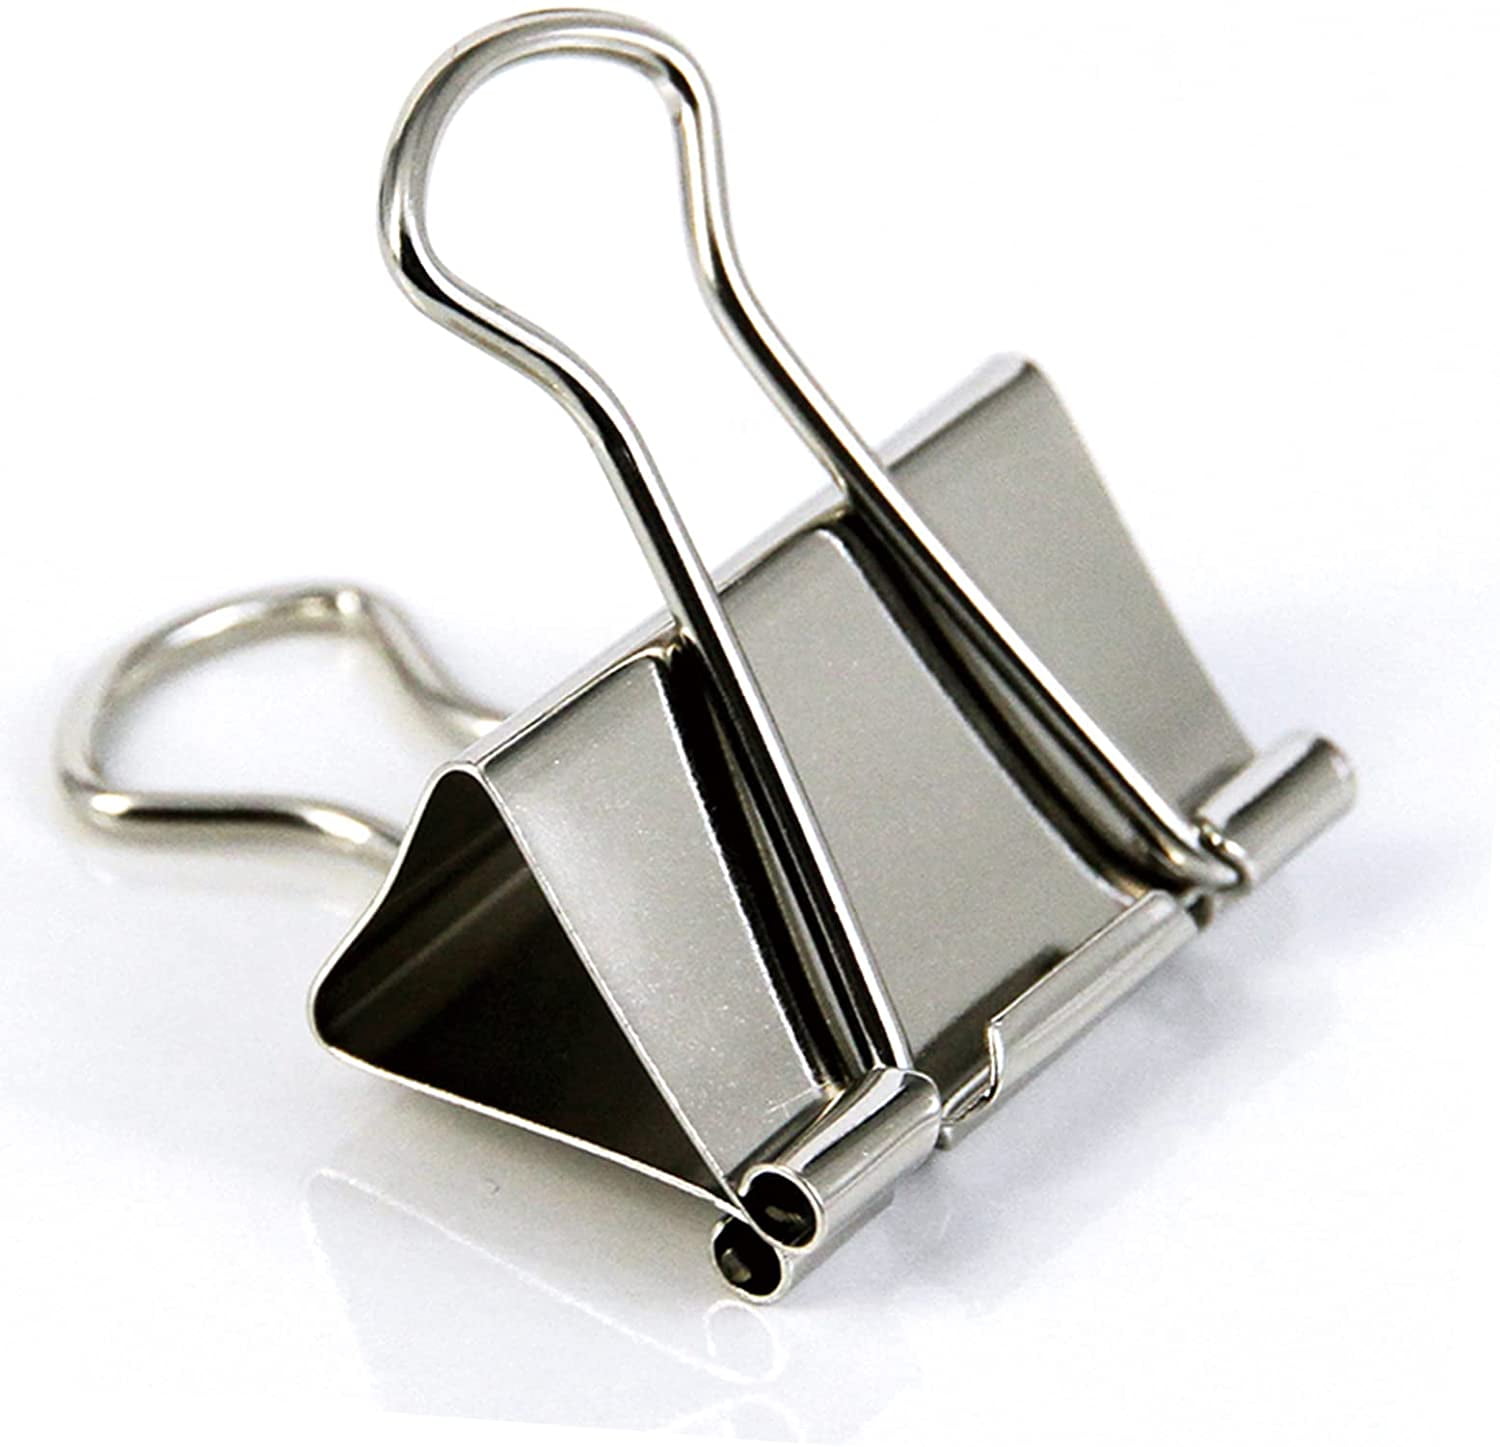 20 Pcs Binder Clips, 1.25 Inches Large Binder Clips, Premium Silver Binder  Clips Large Clips for Paperwork, Upgrade Paper Clamps for School, Office